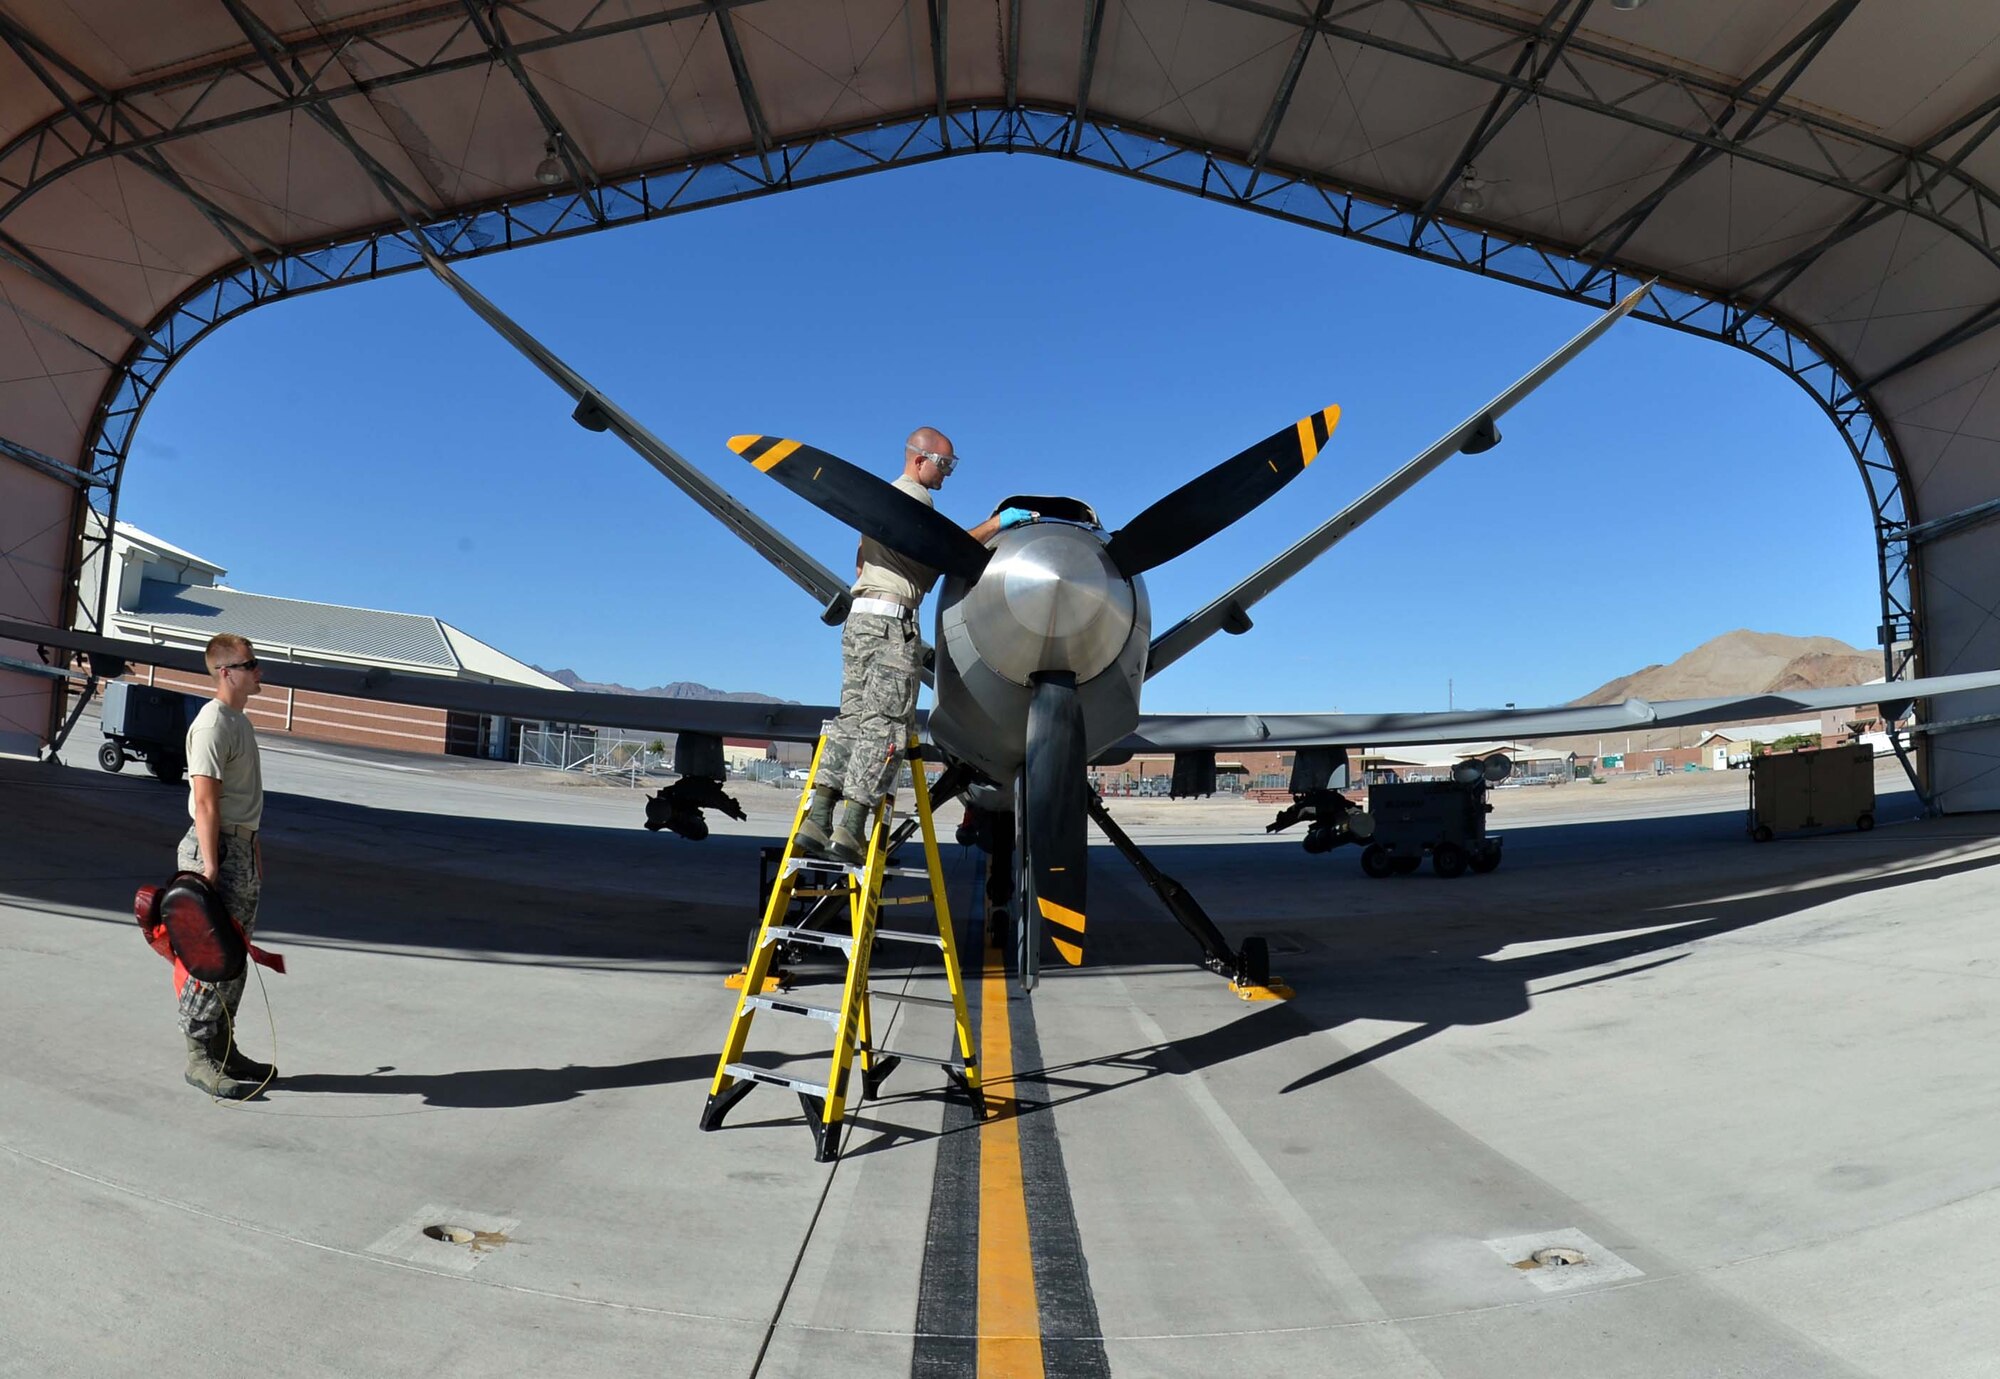 Airman 1st Class Shawn and Airman 1st Class Cole, 432nd Aircraft Maintenance Squadron crew chiefs, inspect an MQ-9 Reaper in preparation for Red Flag 16-3 July 20, 2016, at Creech Air Force Base, Nevada. Red Flag 16-3 incorporates more than 100 aircraft from joint and coalition units that train together on various combat scenarios. (U.S. Air Force photo by Airman 1st Class Kristan Campbell/Released)